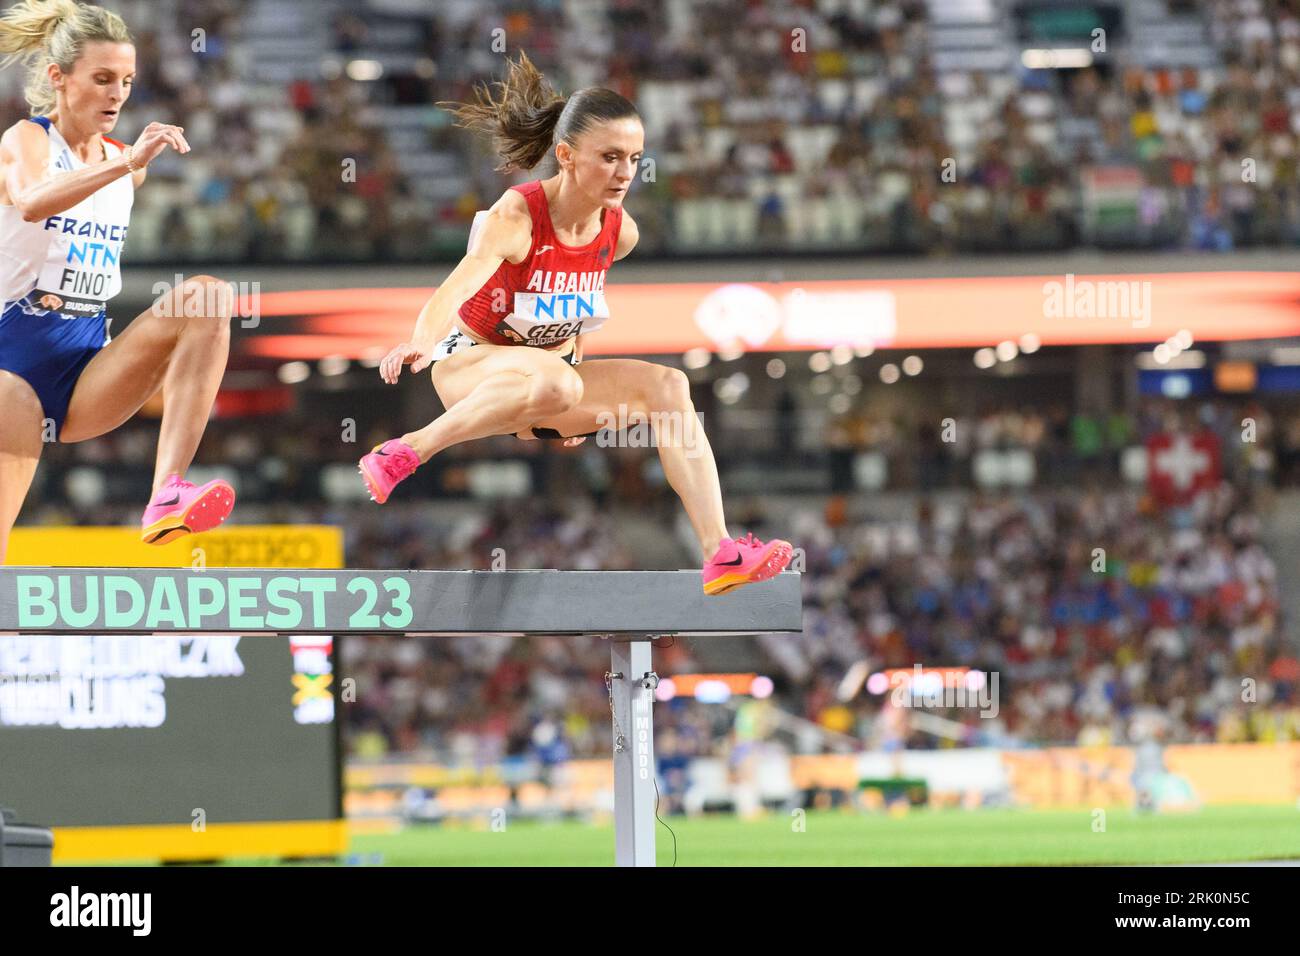 Budapest, Hungary. 23rd Aug, 2023. Luiza Gega (Albania) during the 3000 metres steeplechase heats during the world athletics championships 2023 at the National Athletics Centre, in Budapest, Hungary. (Sven Beyrich/SPP) Credit: SPP Sport Press Photo. /Alamy Live News Credit: SPP Sport Press Photo. /Alamy Live News Stock Photo